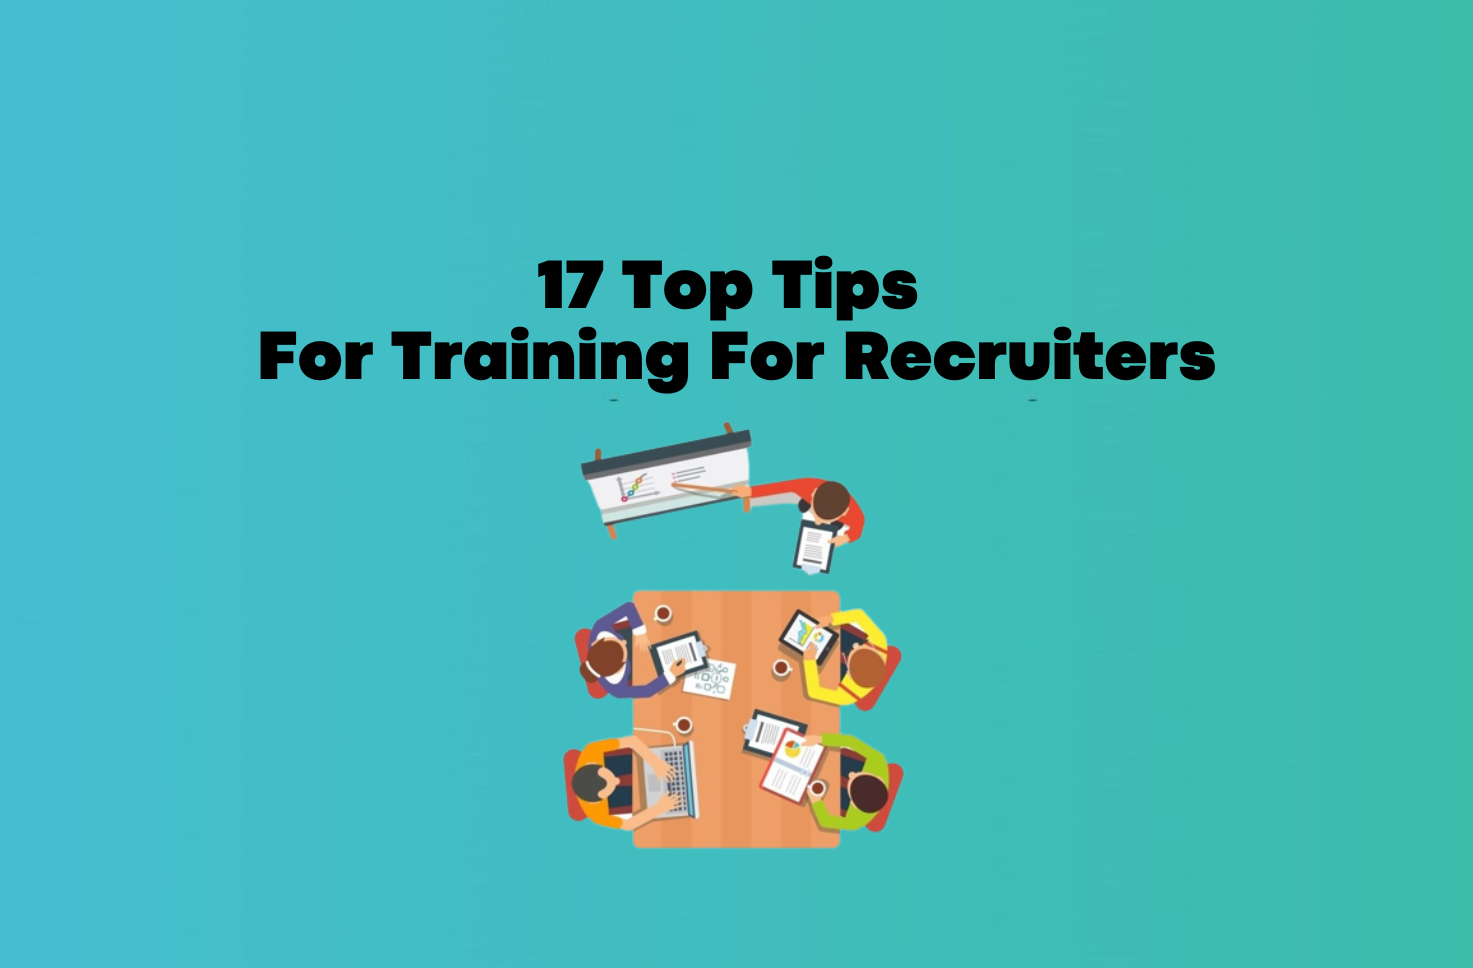 17 Top Tips For Training For Recruiters